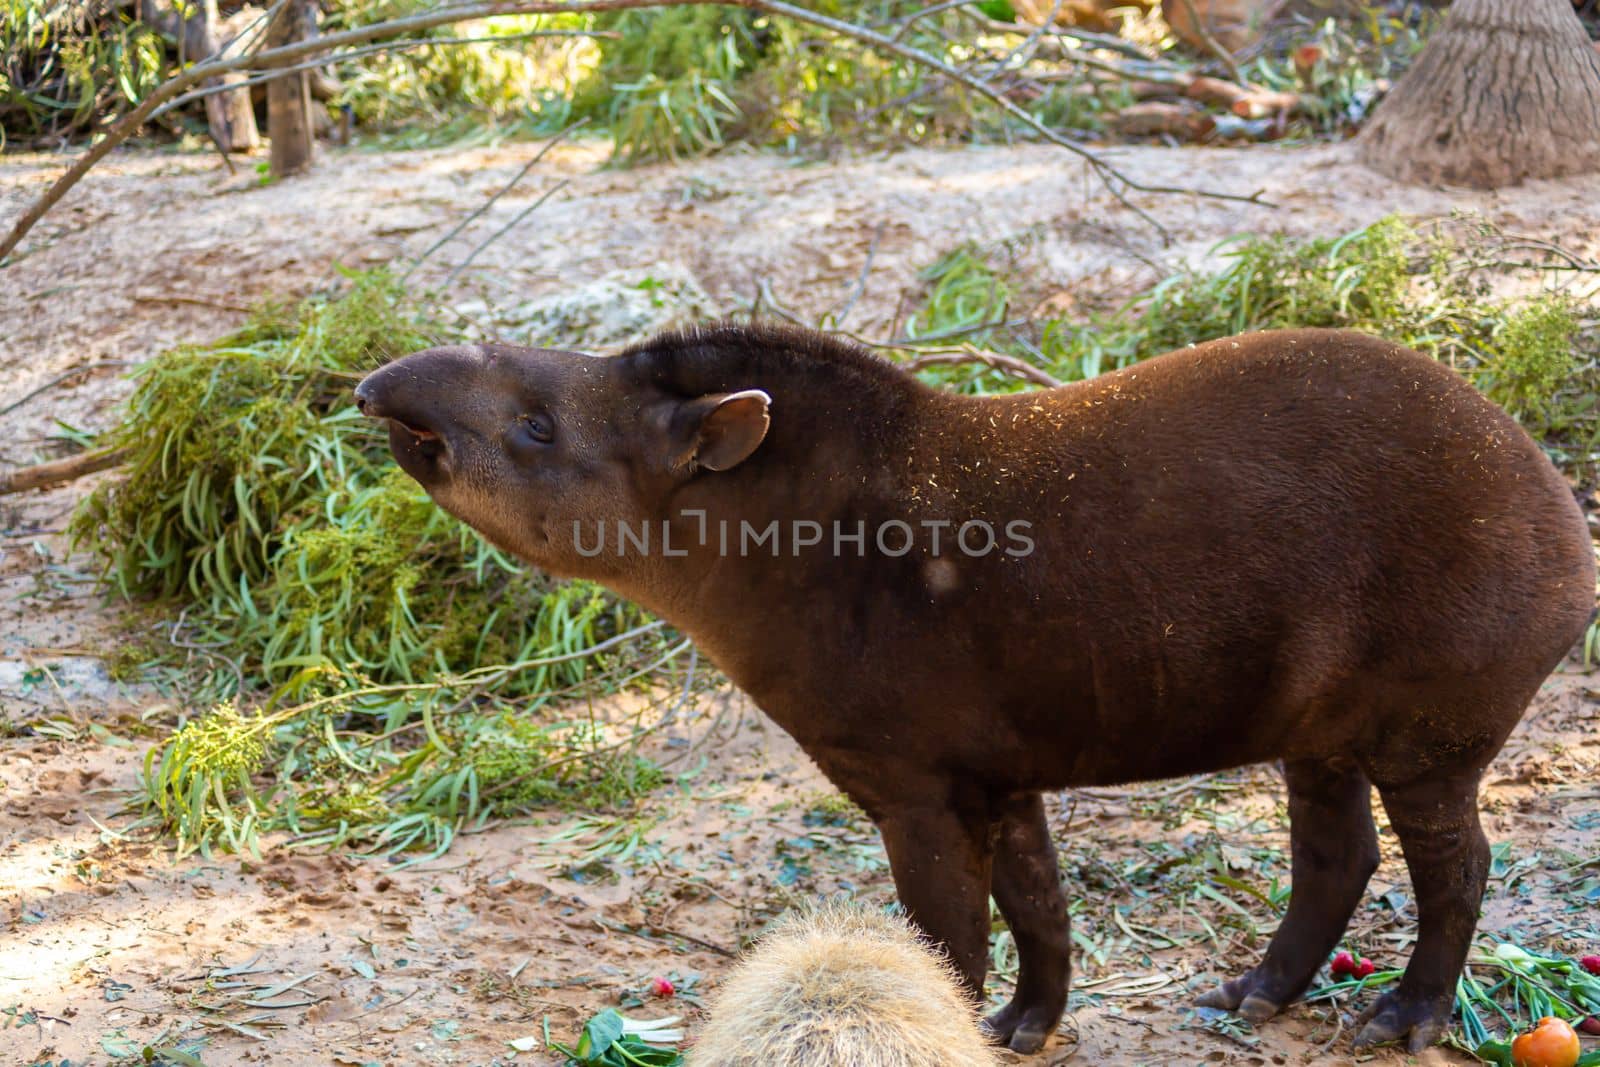 Live tapir in the forest habitat close up by Try_my_best